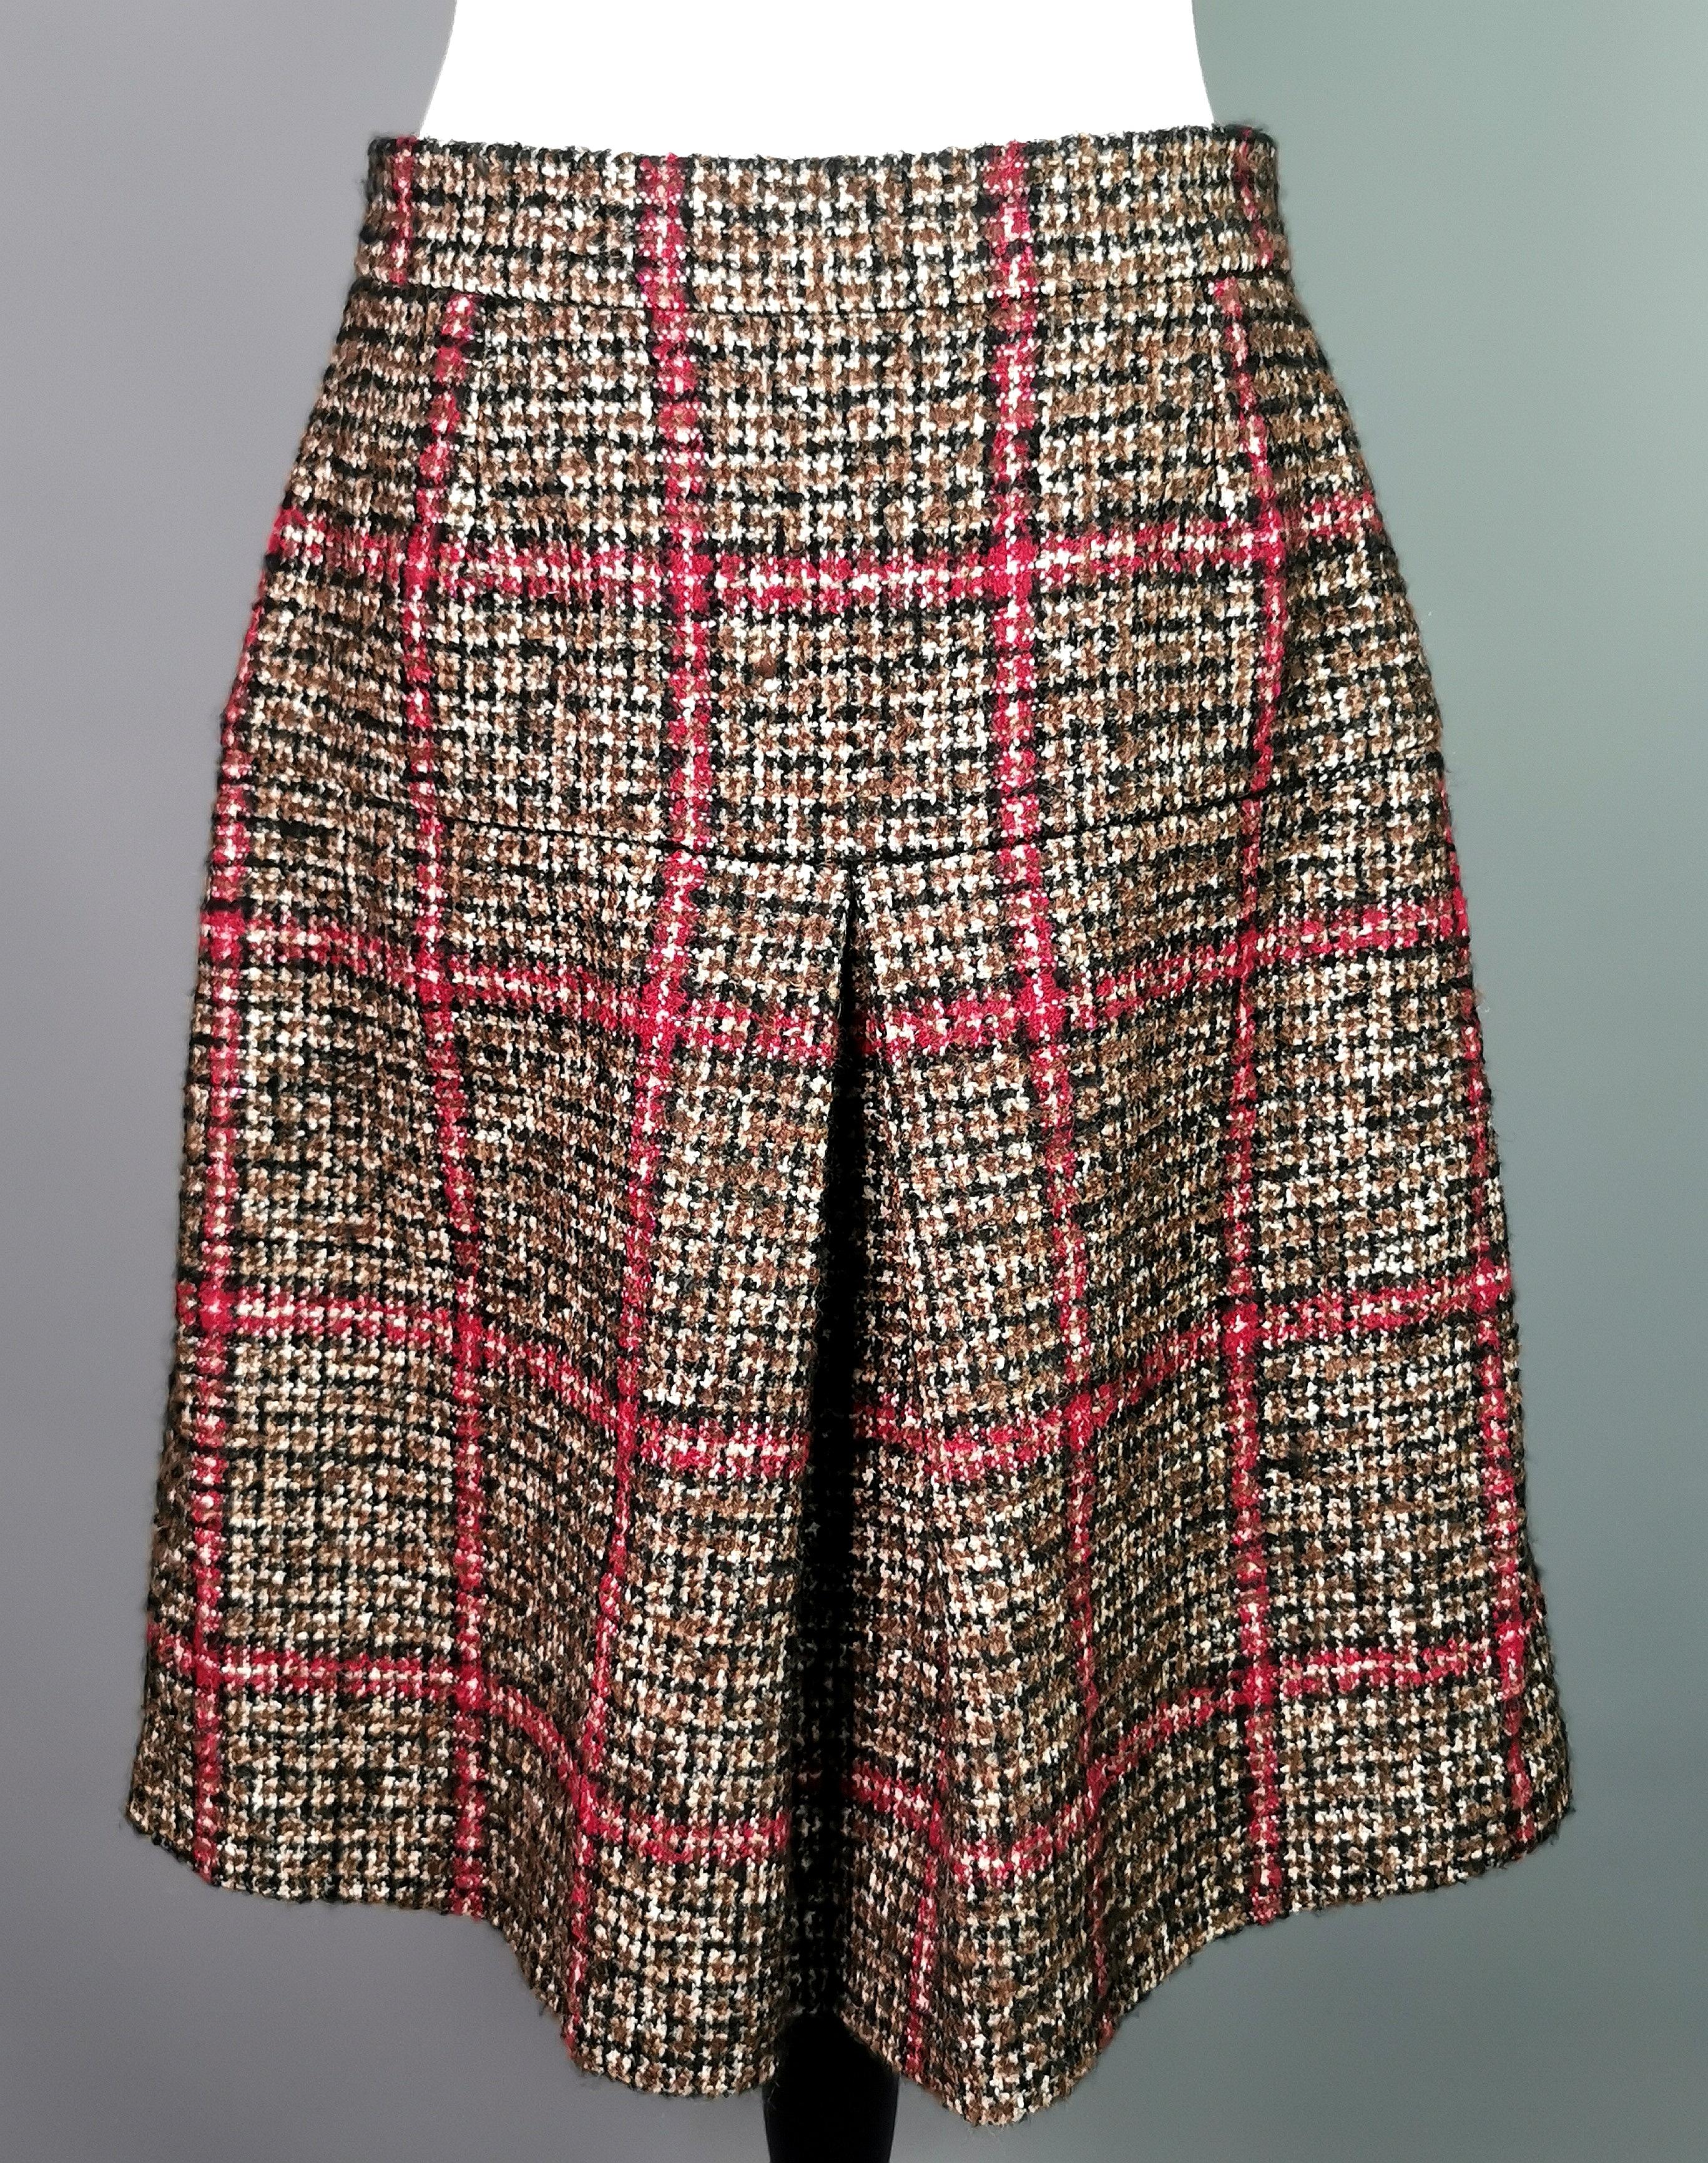 A stylish Dolce and Gabbana Tweed pleat front skirt.

A line style with a deep front pleat in a brown, white and red check wool blend.

Zip and snap fastening to the back, the skirt has an awesome silky animal print lining.

There are multiple ways